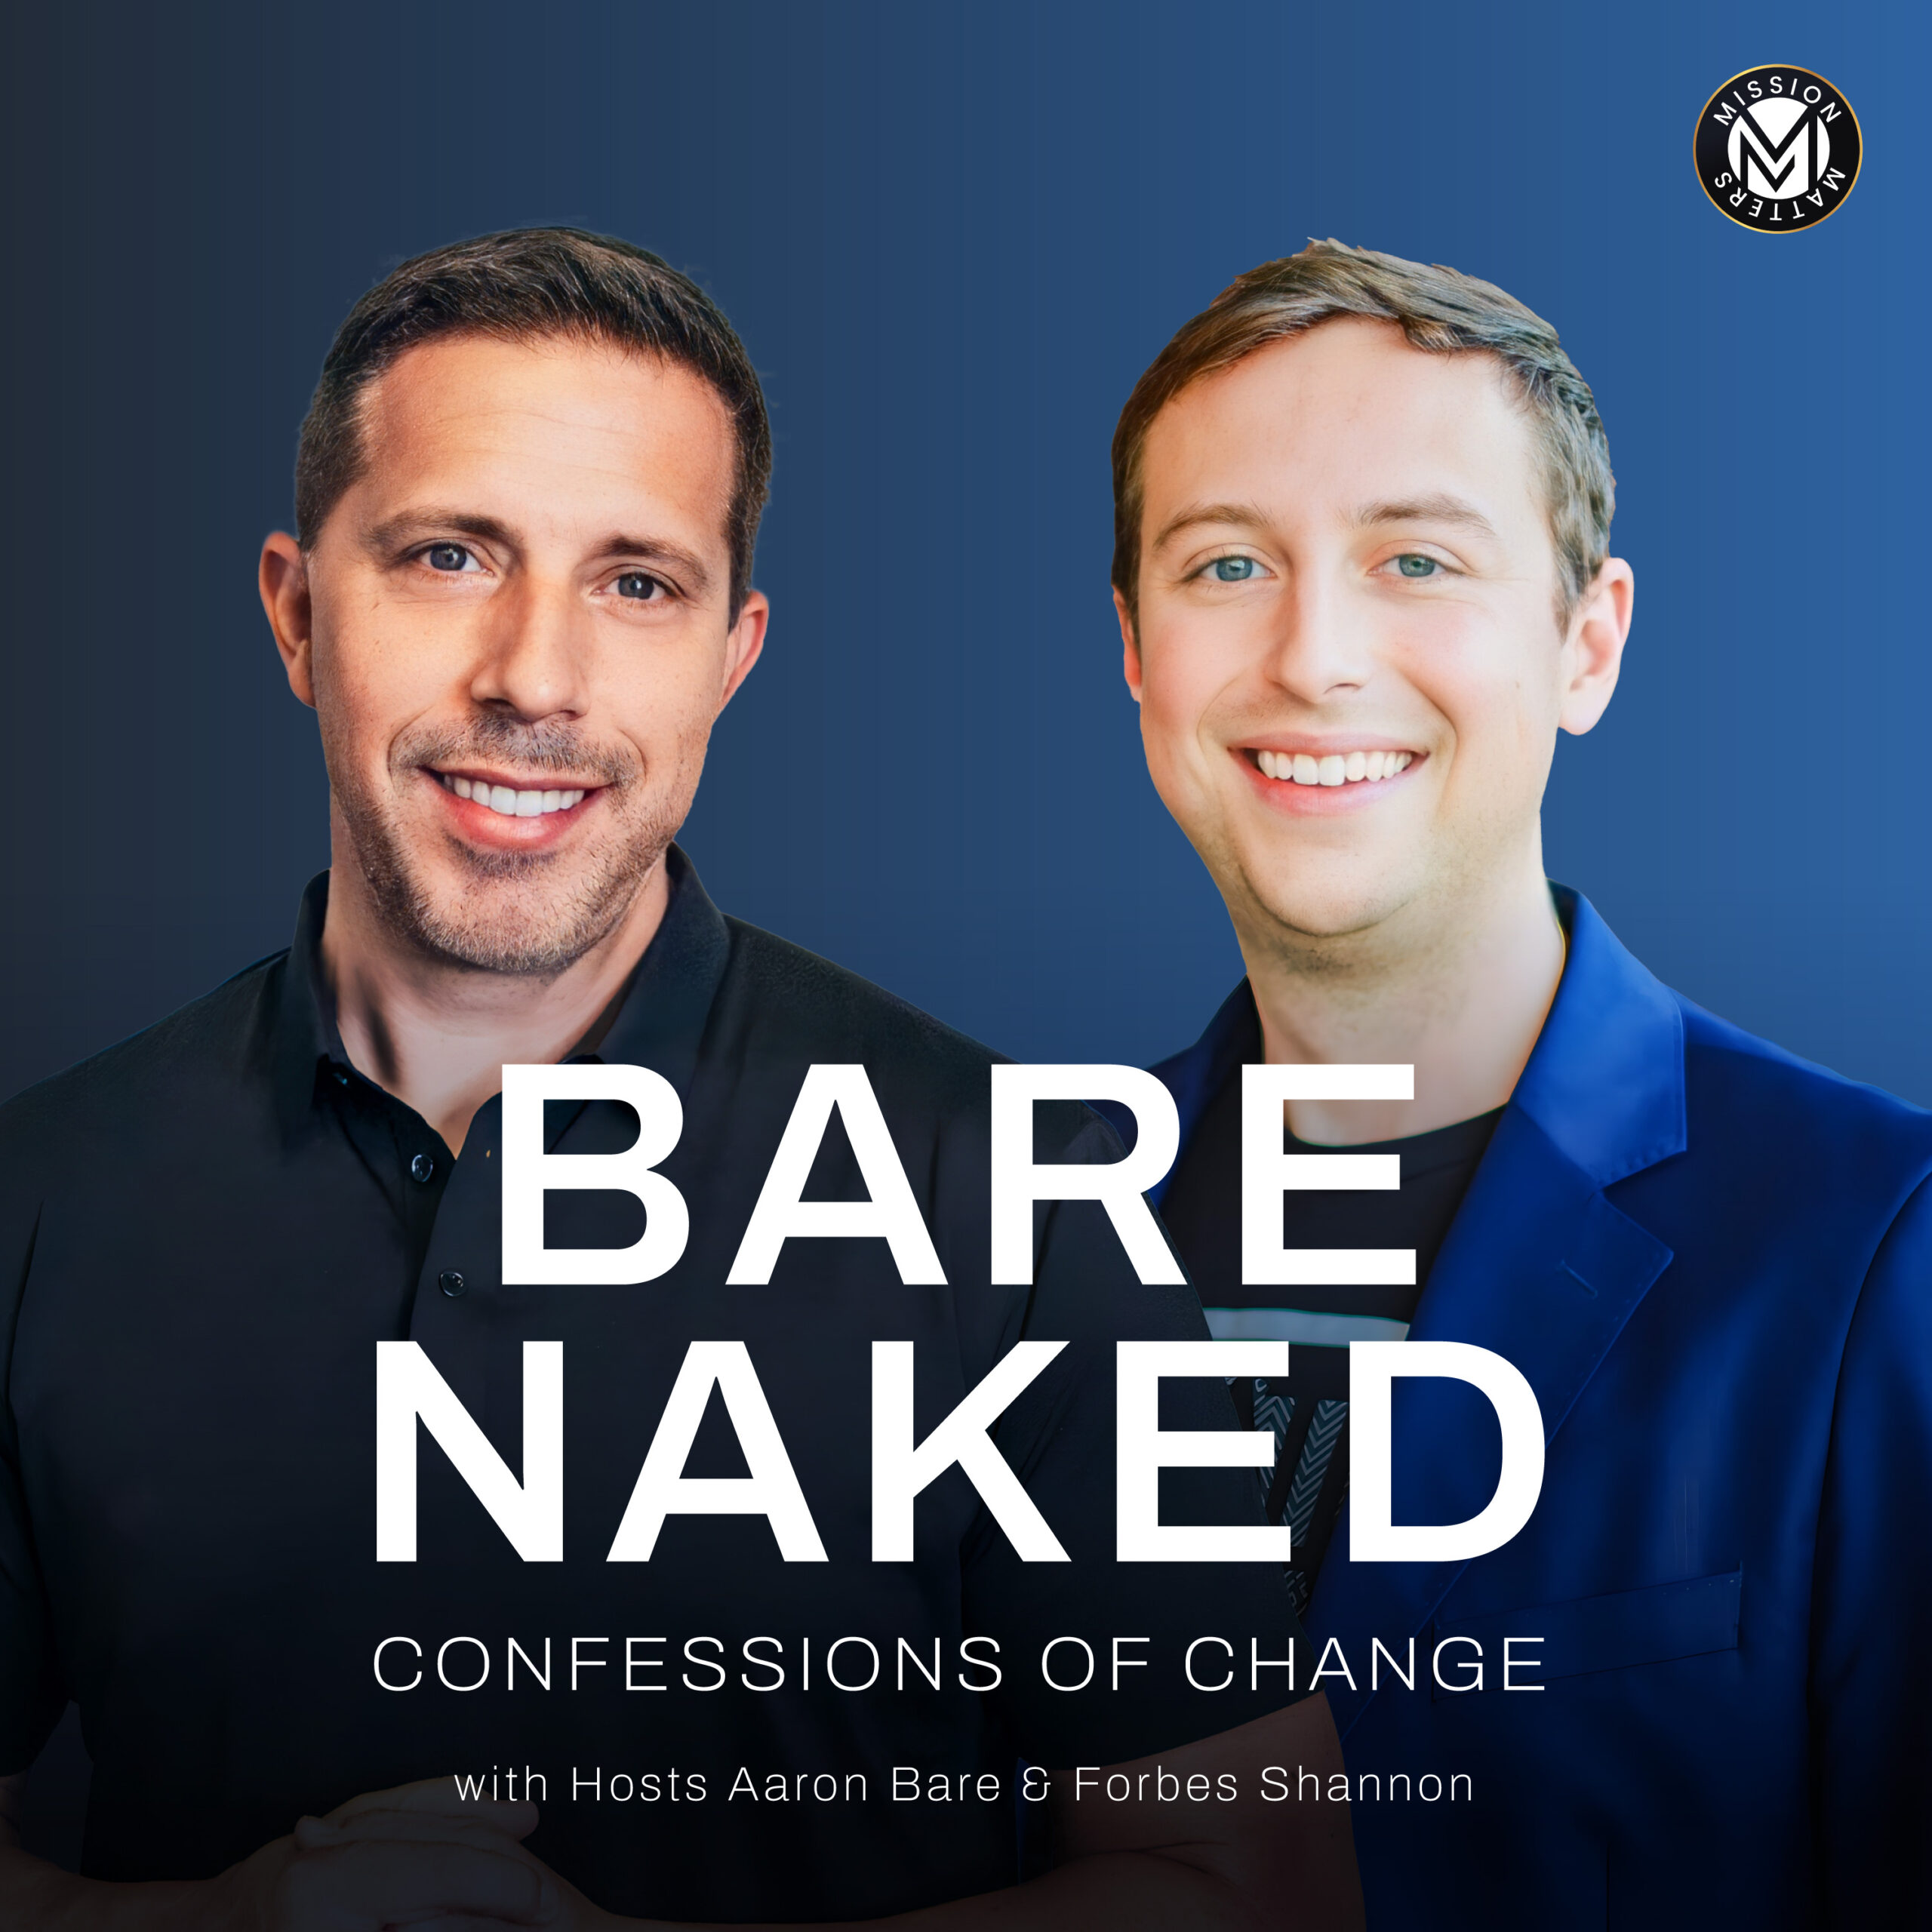 Bare Naked; Confessions of Change COMING SOON